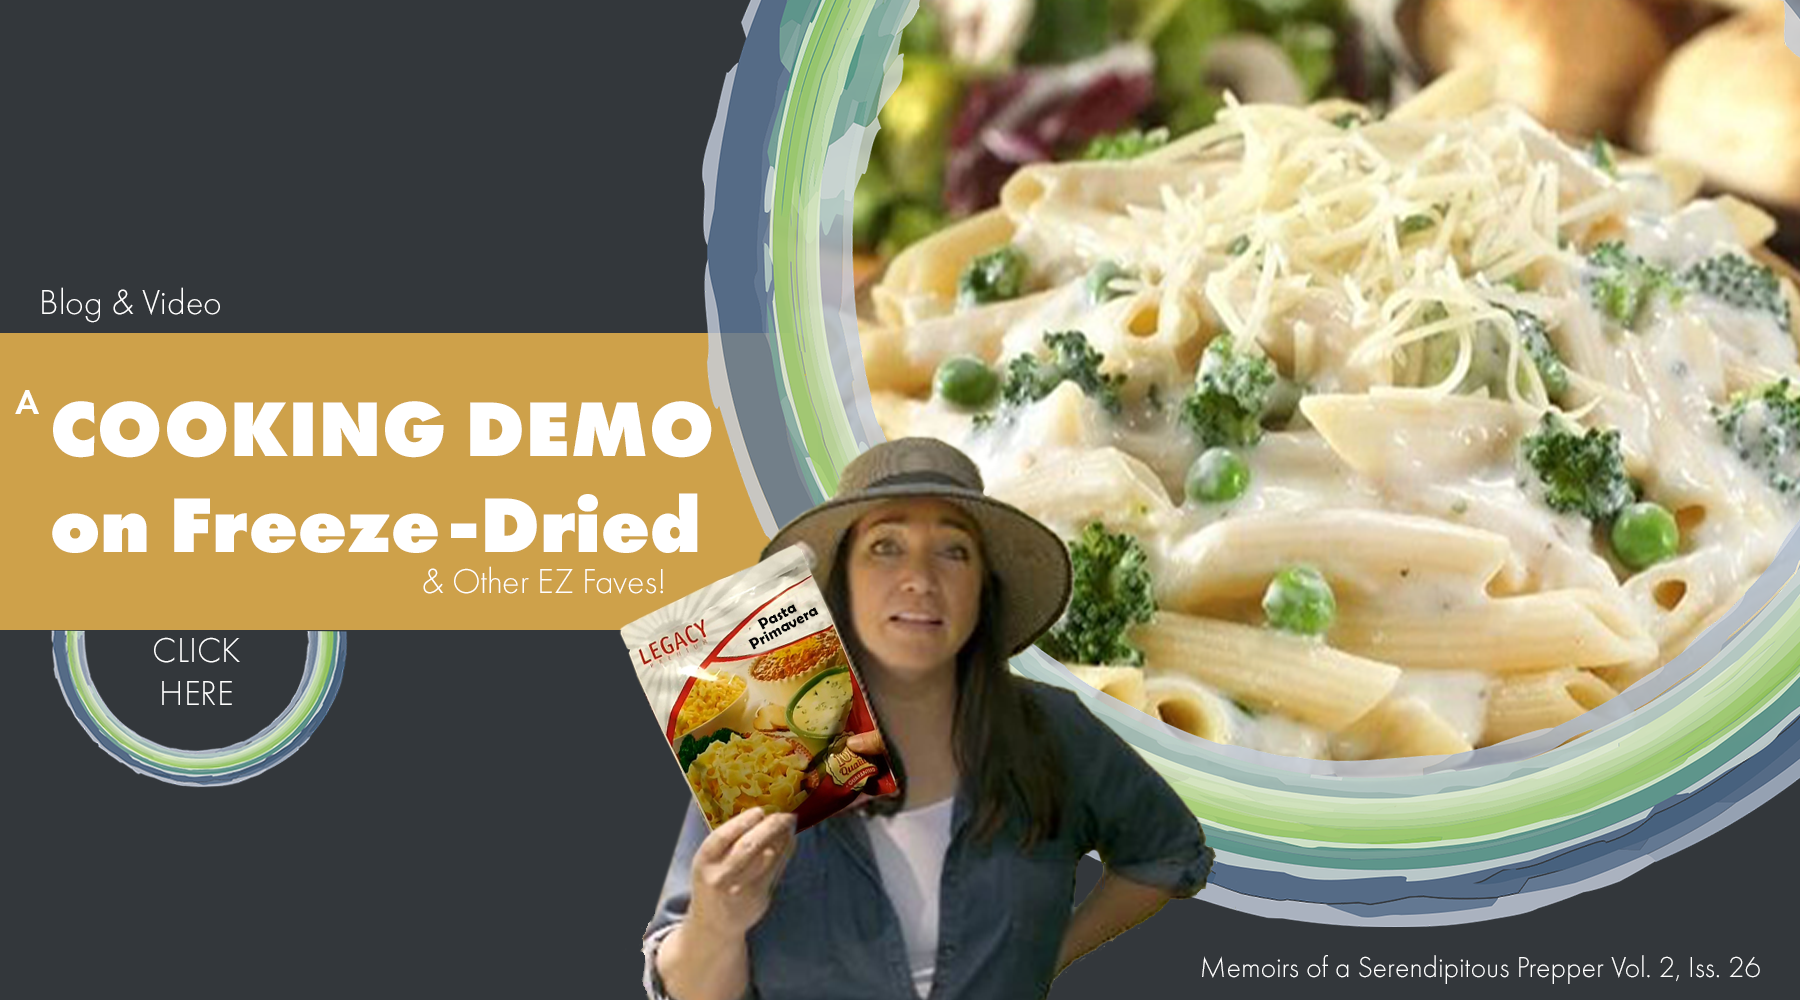 A Cooking Demo On Freeze-Dried!